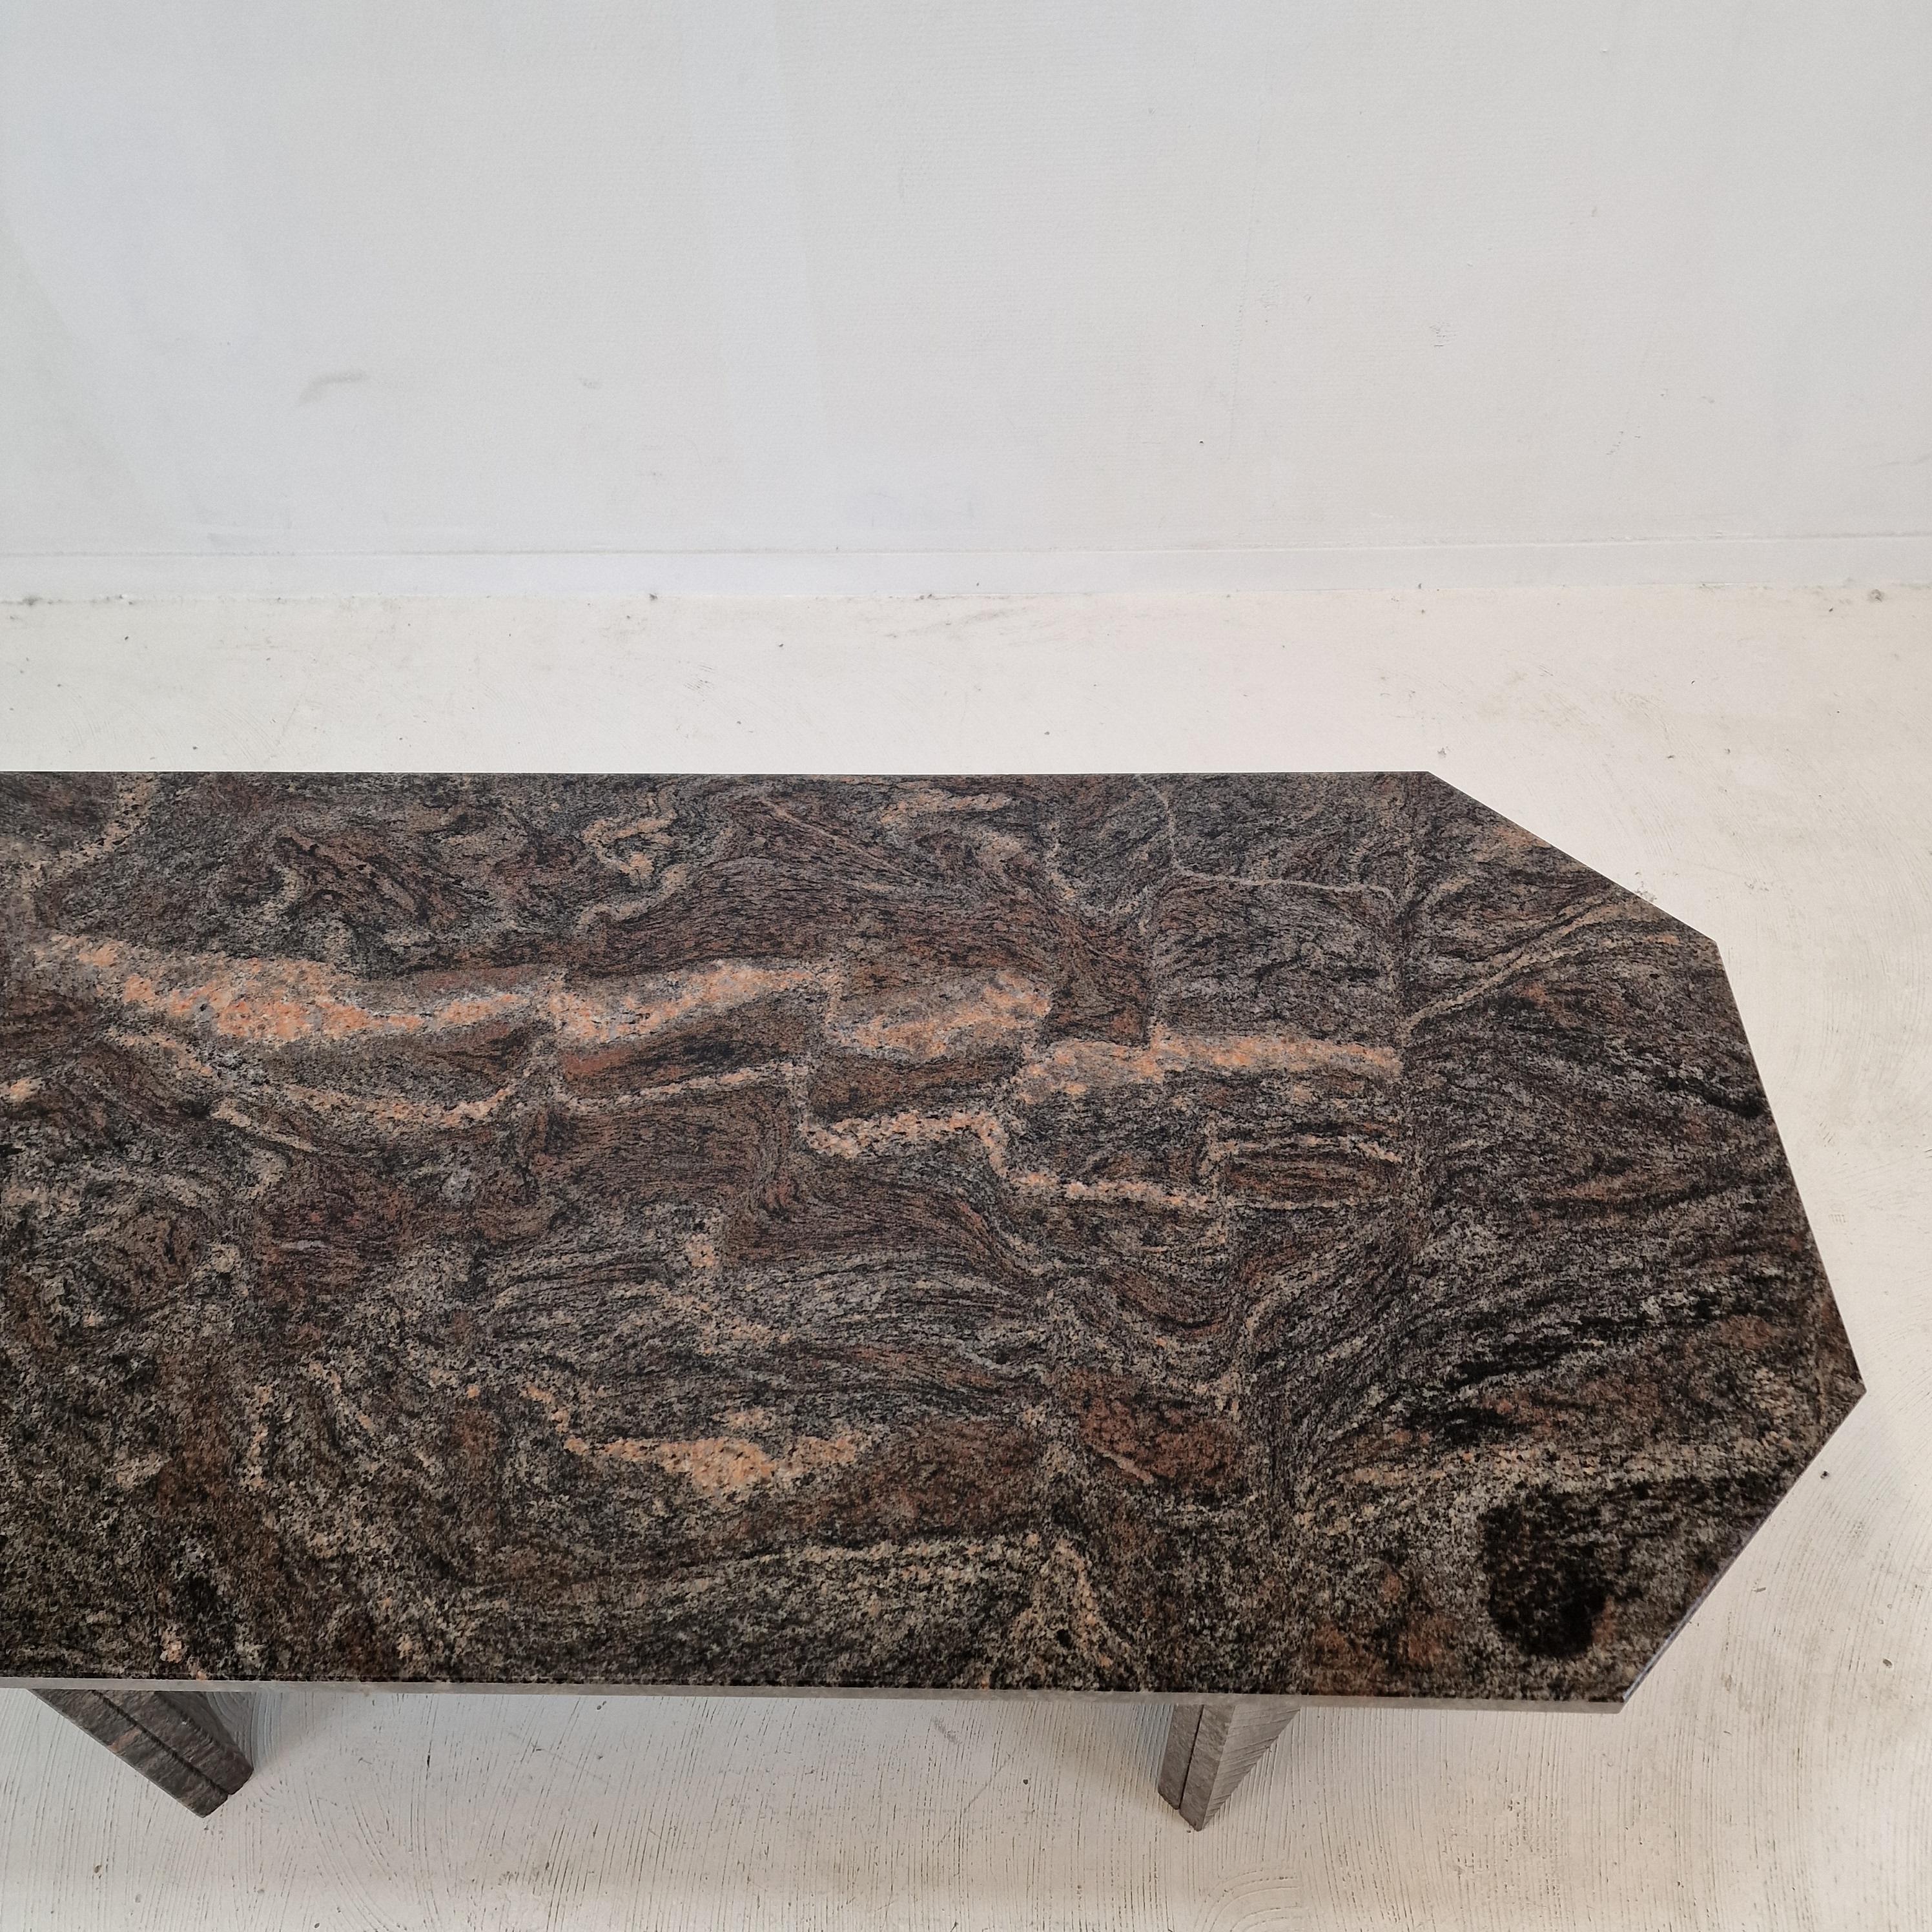 Italian Coffee or Side Table in Granite, 1980s For Sale 5